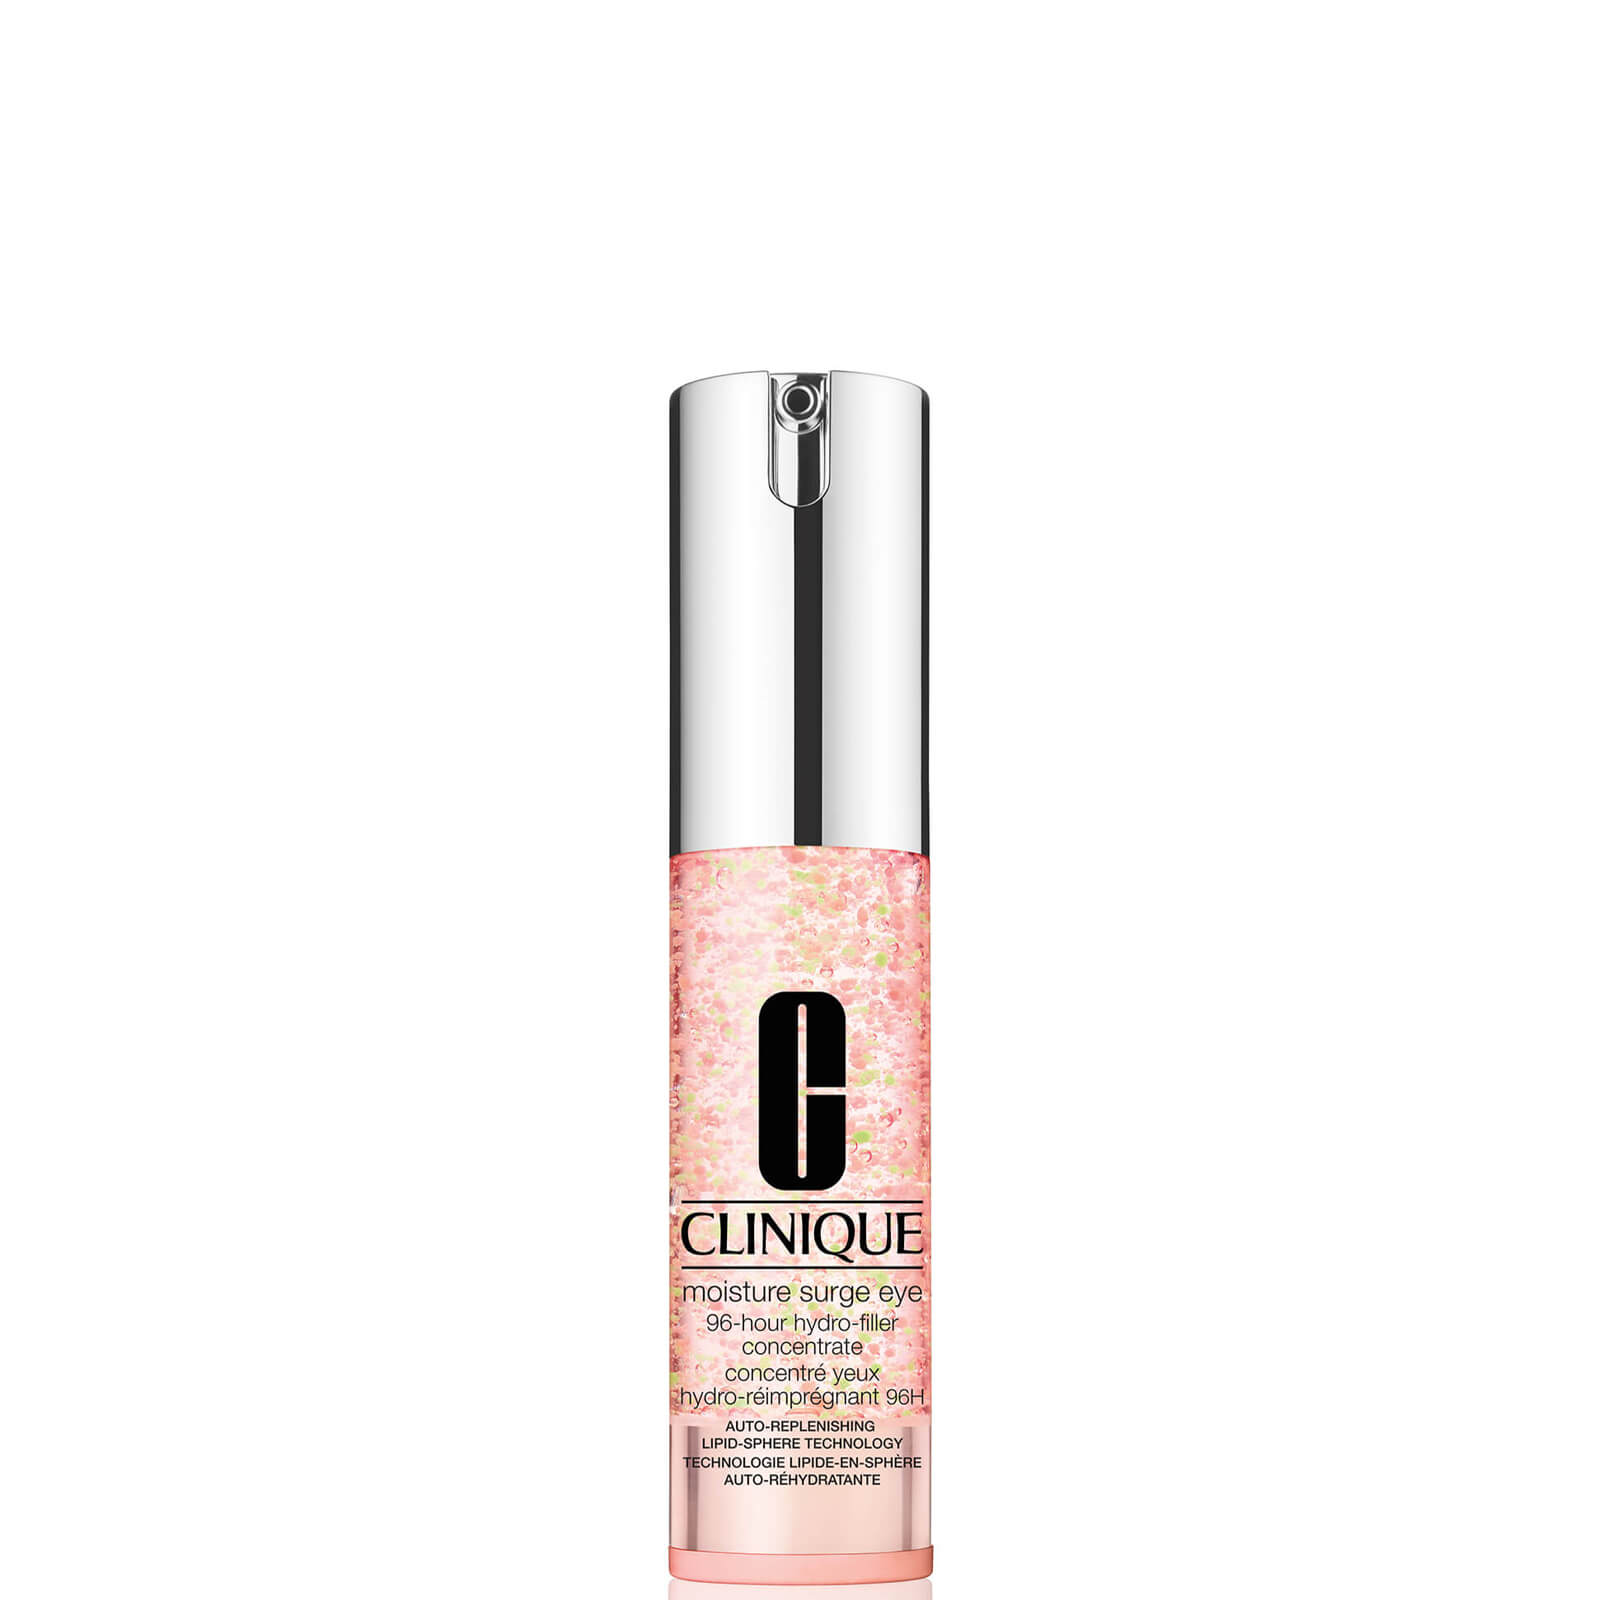 Image of Clinique Moisture Surge Eye 96-Hour Hydro-Filler Concentrate 15ml